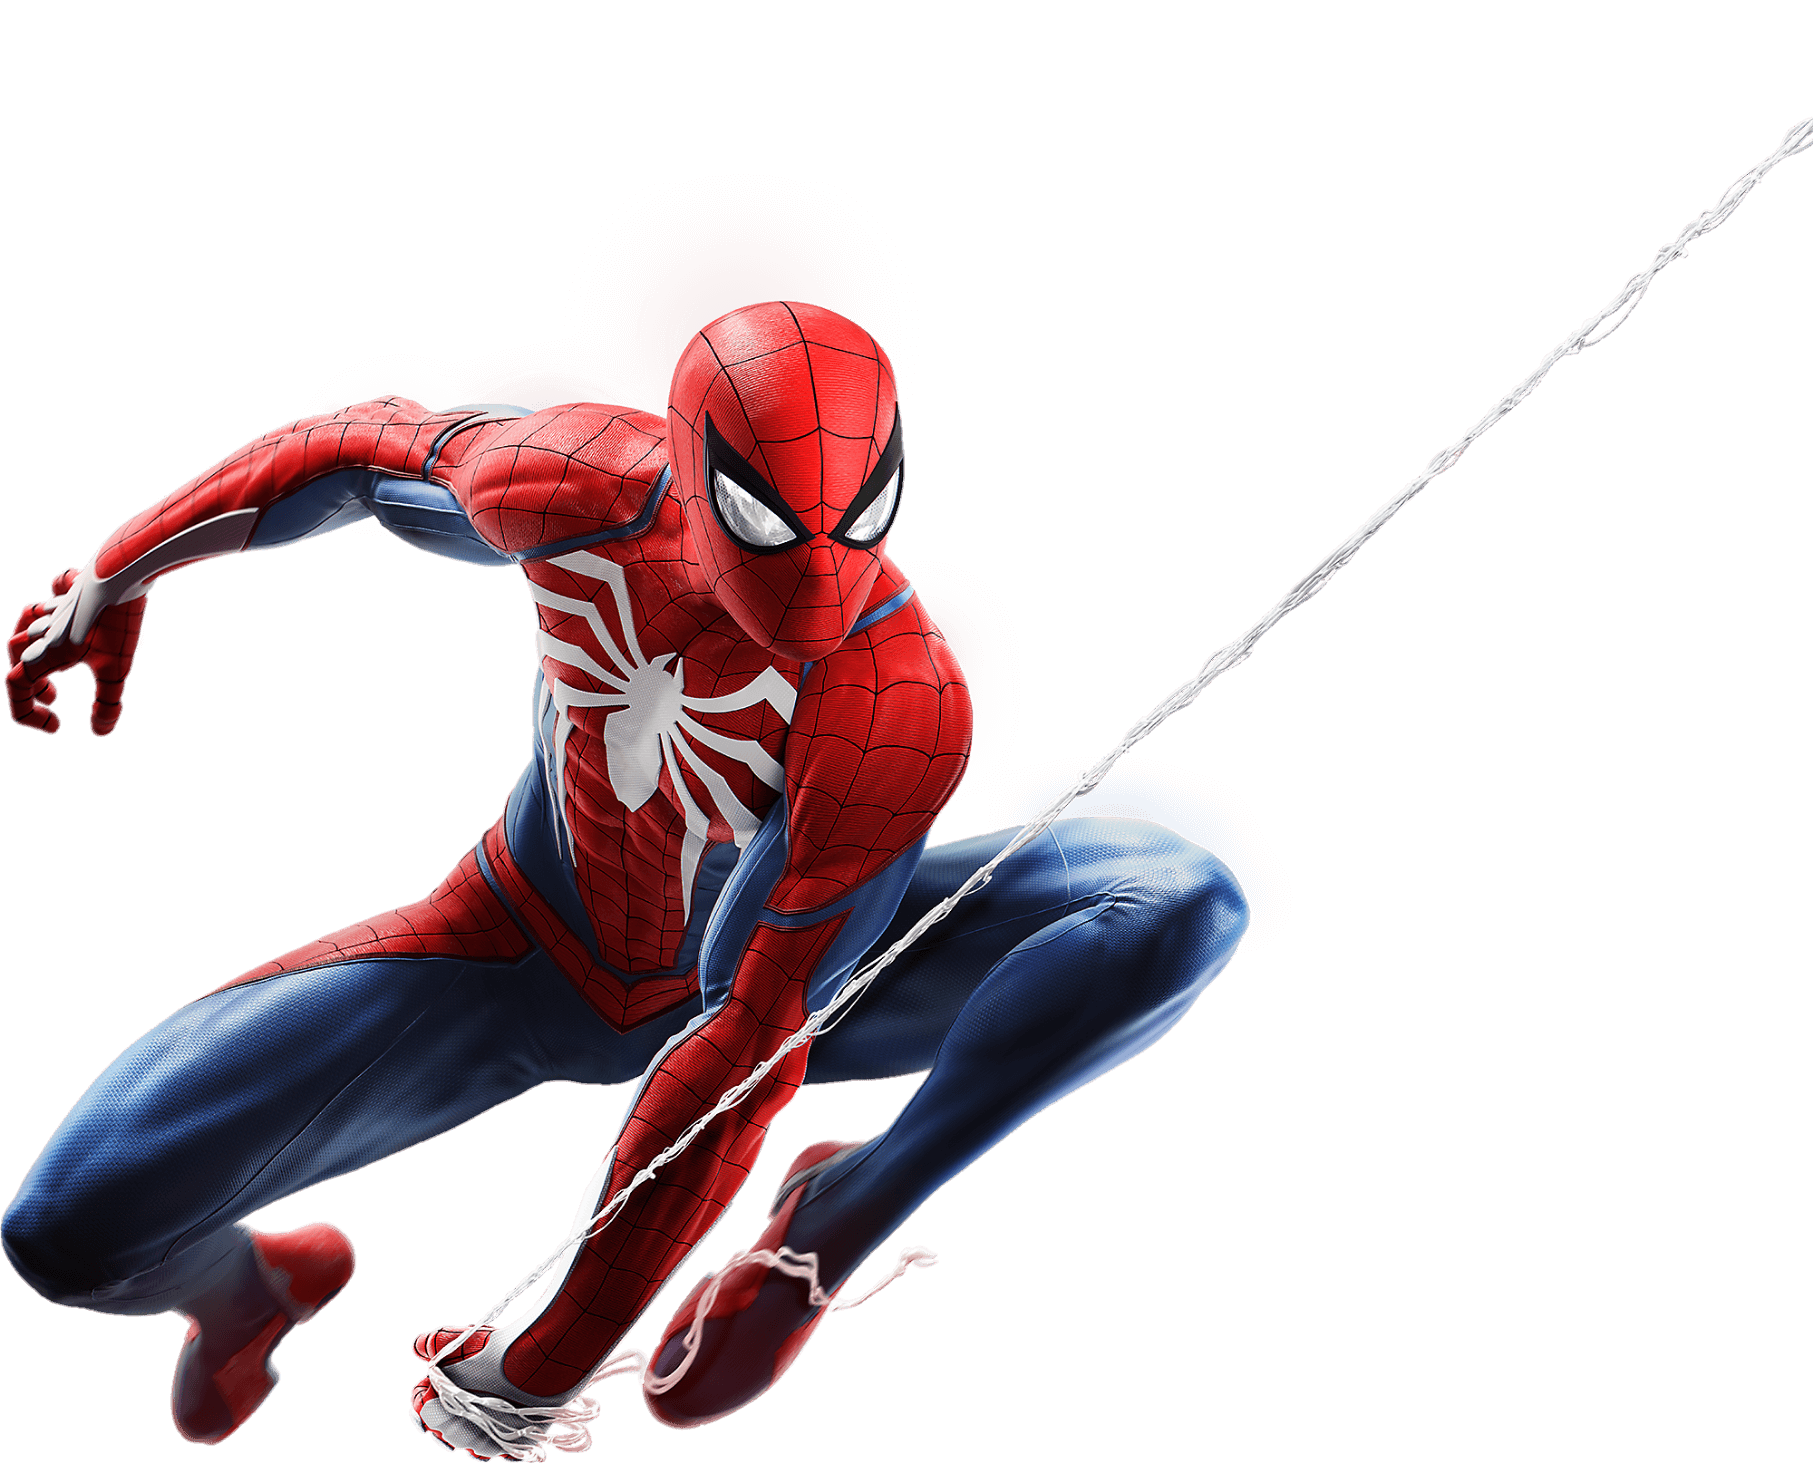 spider-man-png-from-pngfre-44